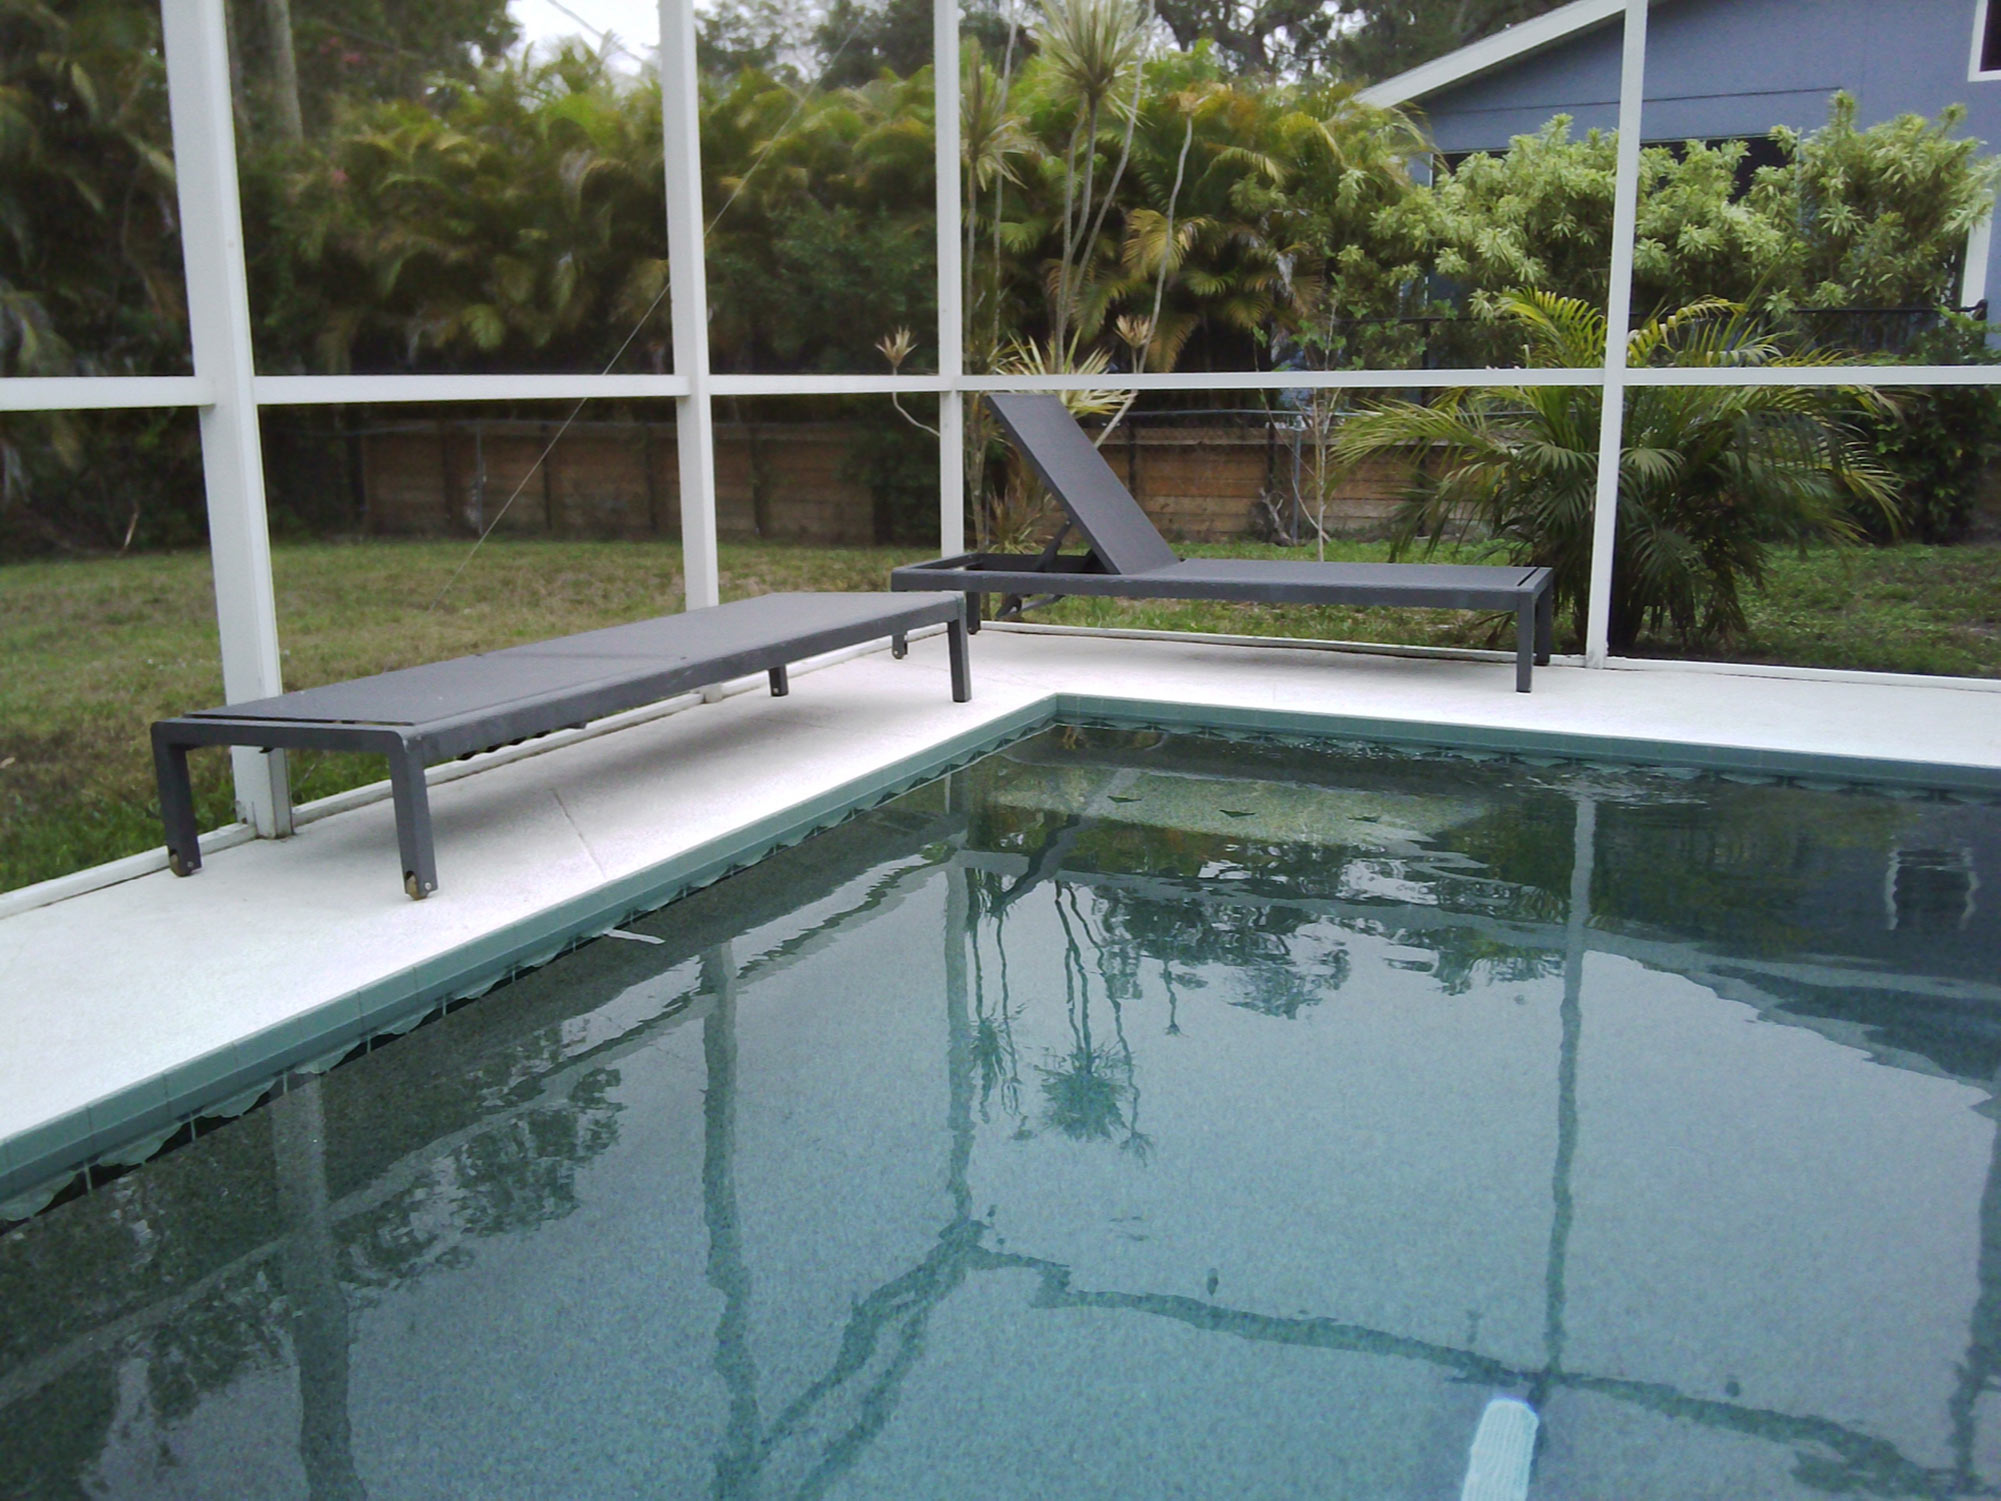 An empty swimming pool in Florida. A sunlounger is reflected in the water